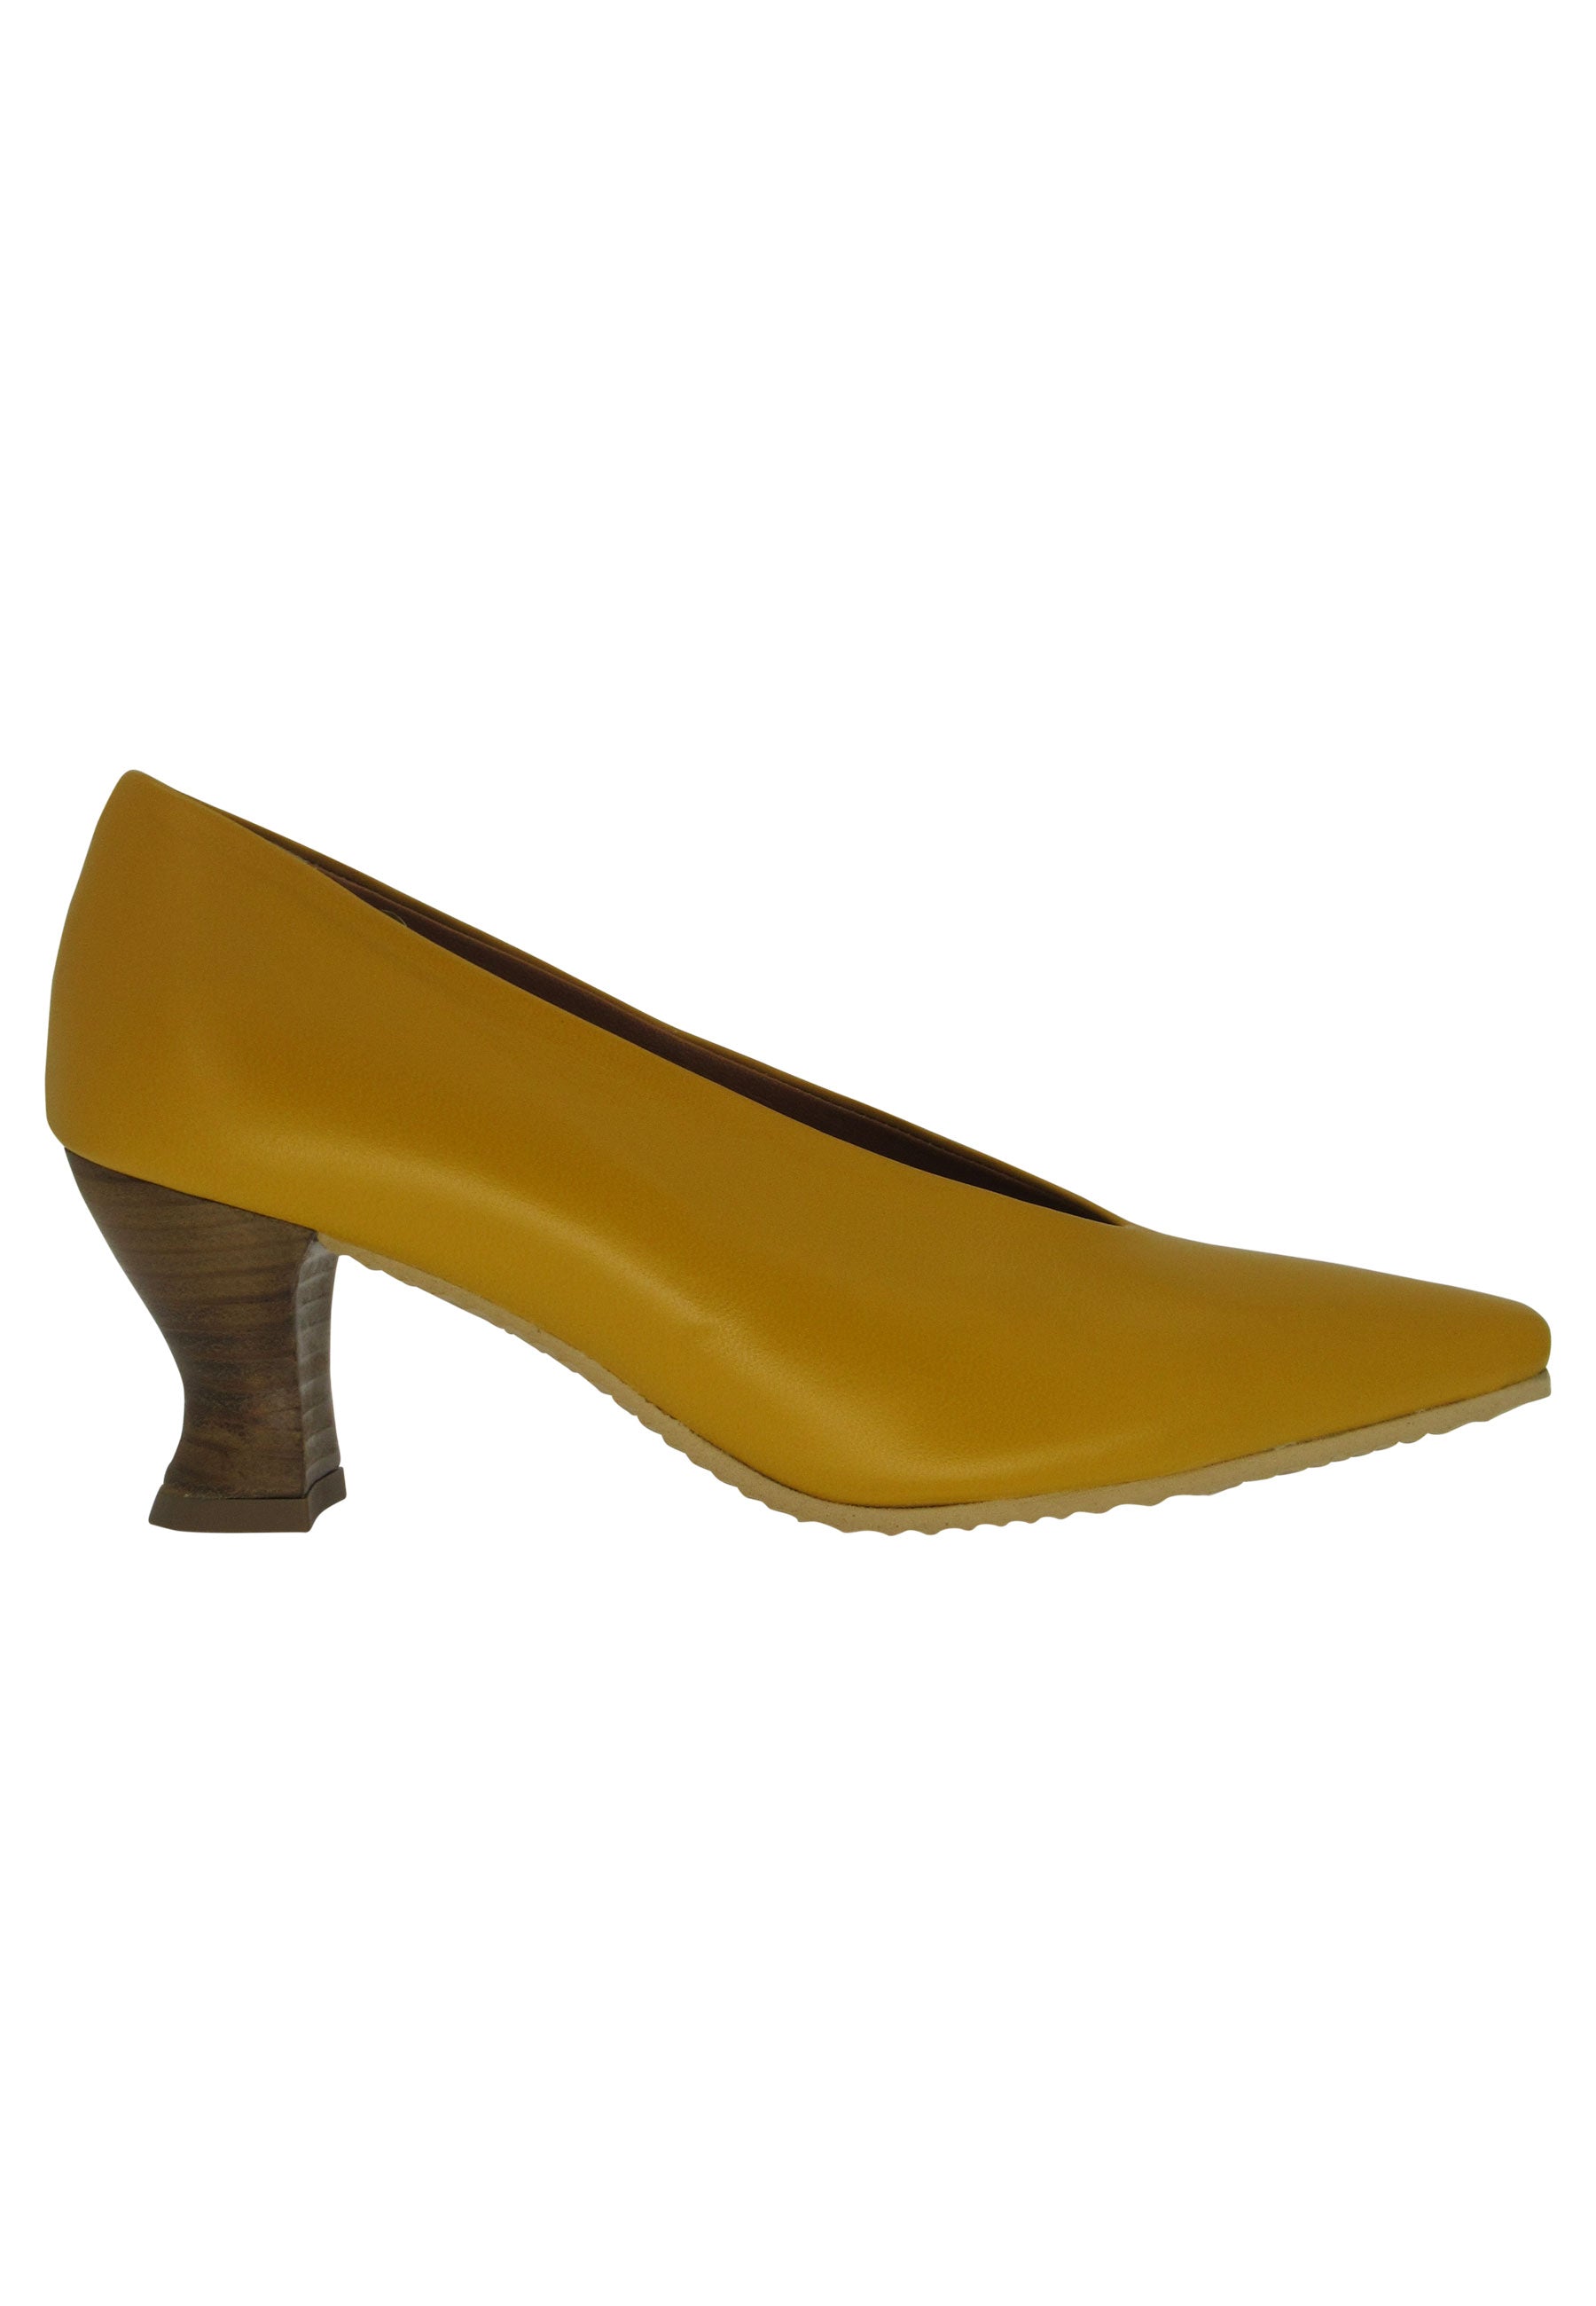 Women's yellow leather pumps with rubber sole